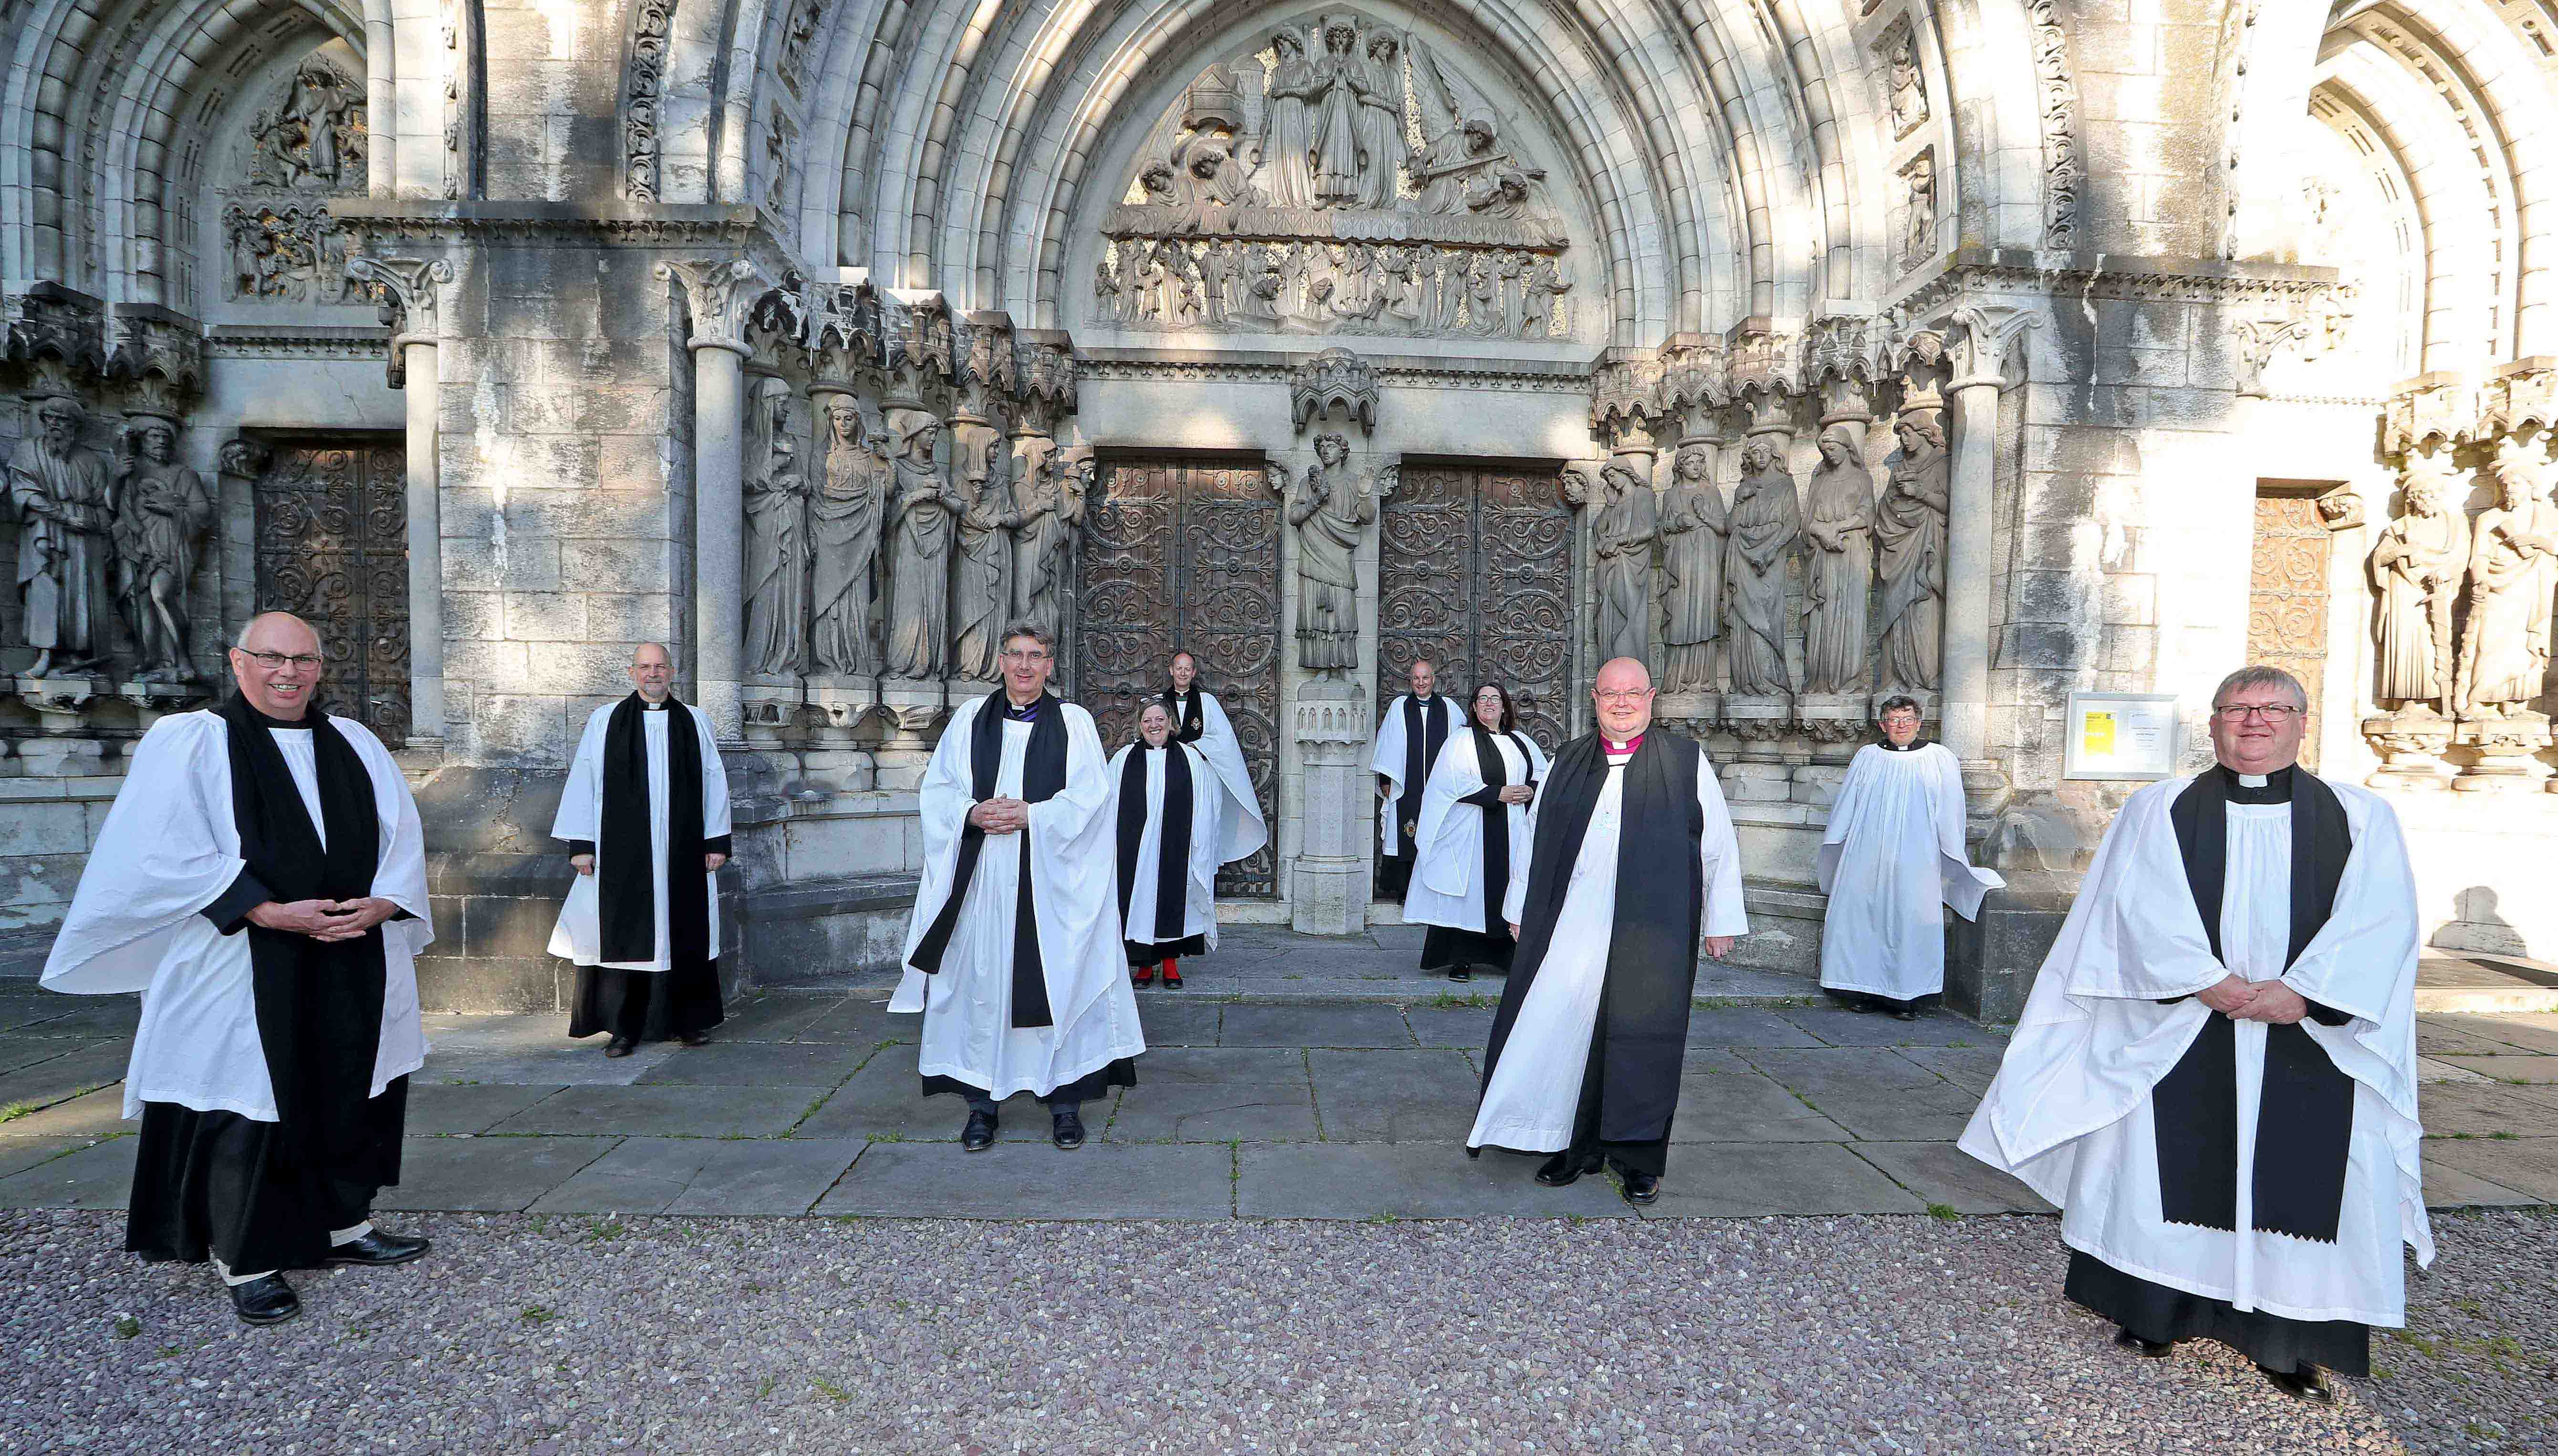 Pictured is the Very Reverend Nigel Dunne, Dean of Cork (third from left), the Bishop of Cork, Cloyne and Ross, the Right Reverend Paul Colton (third from right) with the Revd Canon Andrew Orr (front left) and the Revd Canon Denis MacCarthy (front right) and members of the Cathedral Chapter, following the Installation of the Revd Canon Denis MacCarthy, as Prebendary of Kilbrittain and Holy Trinity, and the Installation of the Revd Canon Andrew Orr, as Honorary Canon with Special Responsibility for the Fifth Mark of Mission, at the Cathedral Church of Saint Fin Barre, Cork. Picture: Jim Coughlan.